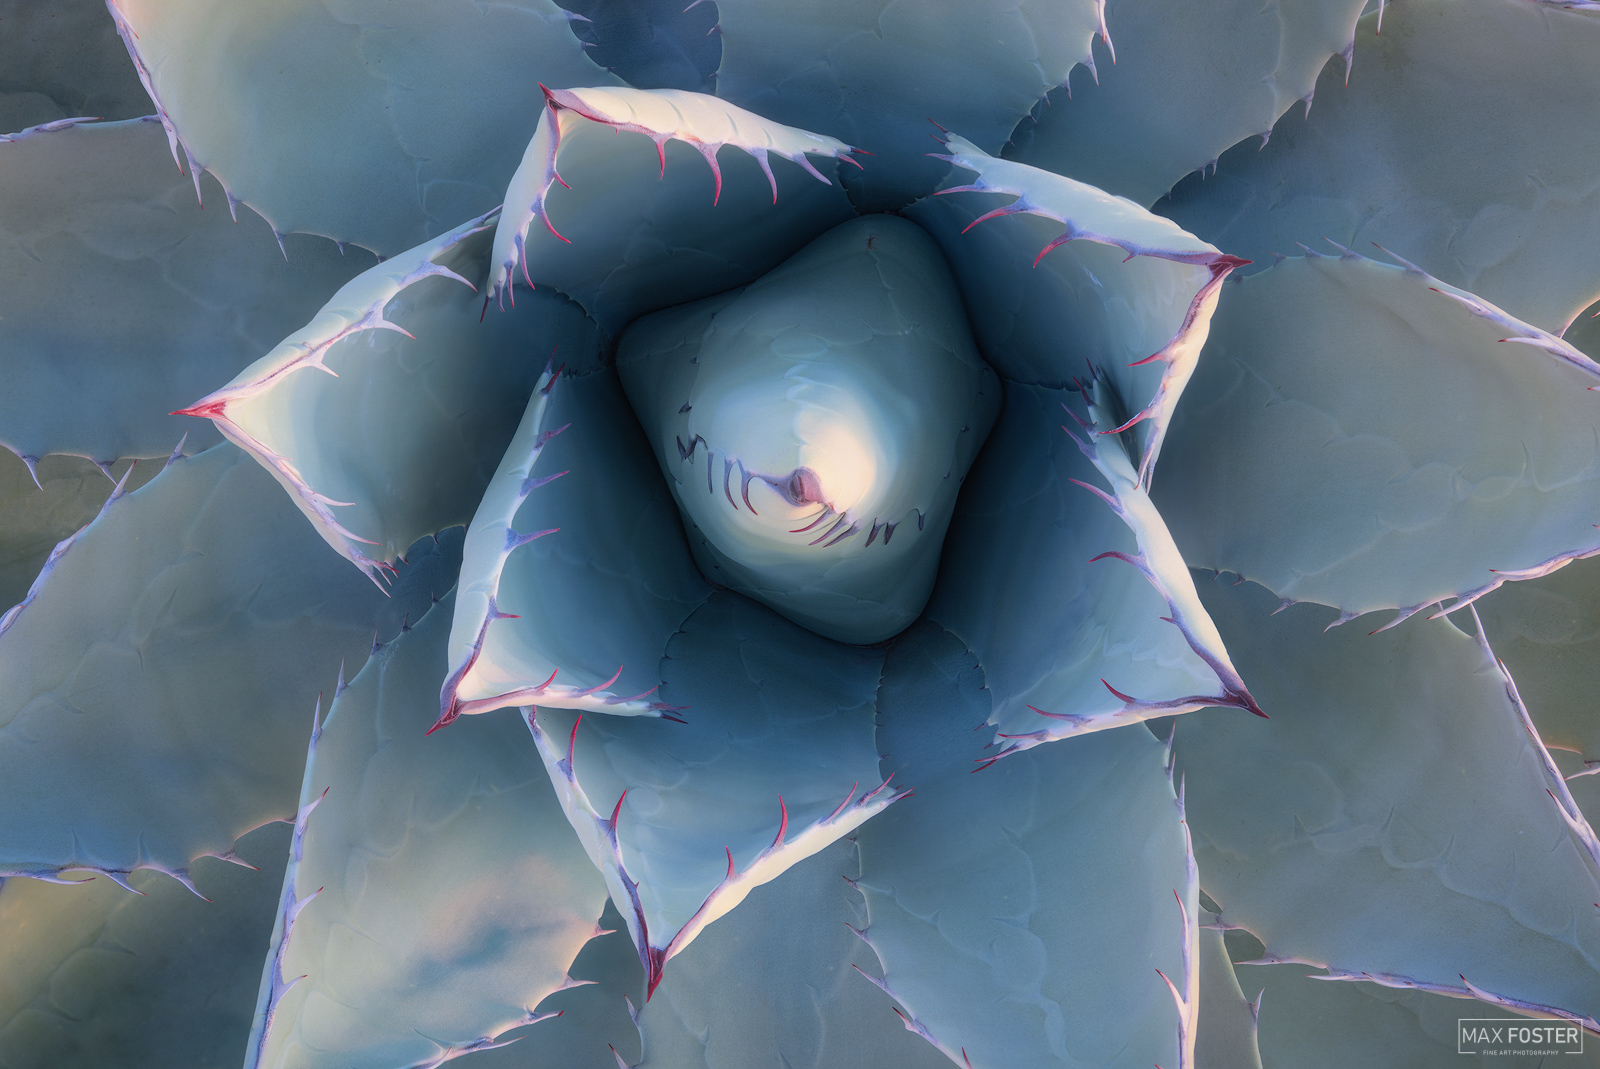 Bring nature into your home with A Dangerous Beauty, Max Foster's limited edition photography print of a Desert Agave from his...